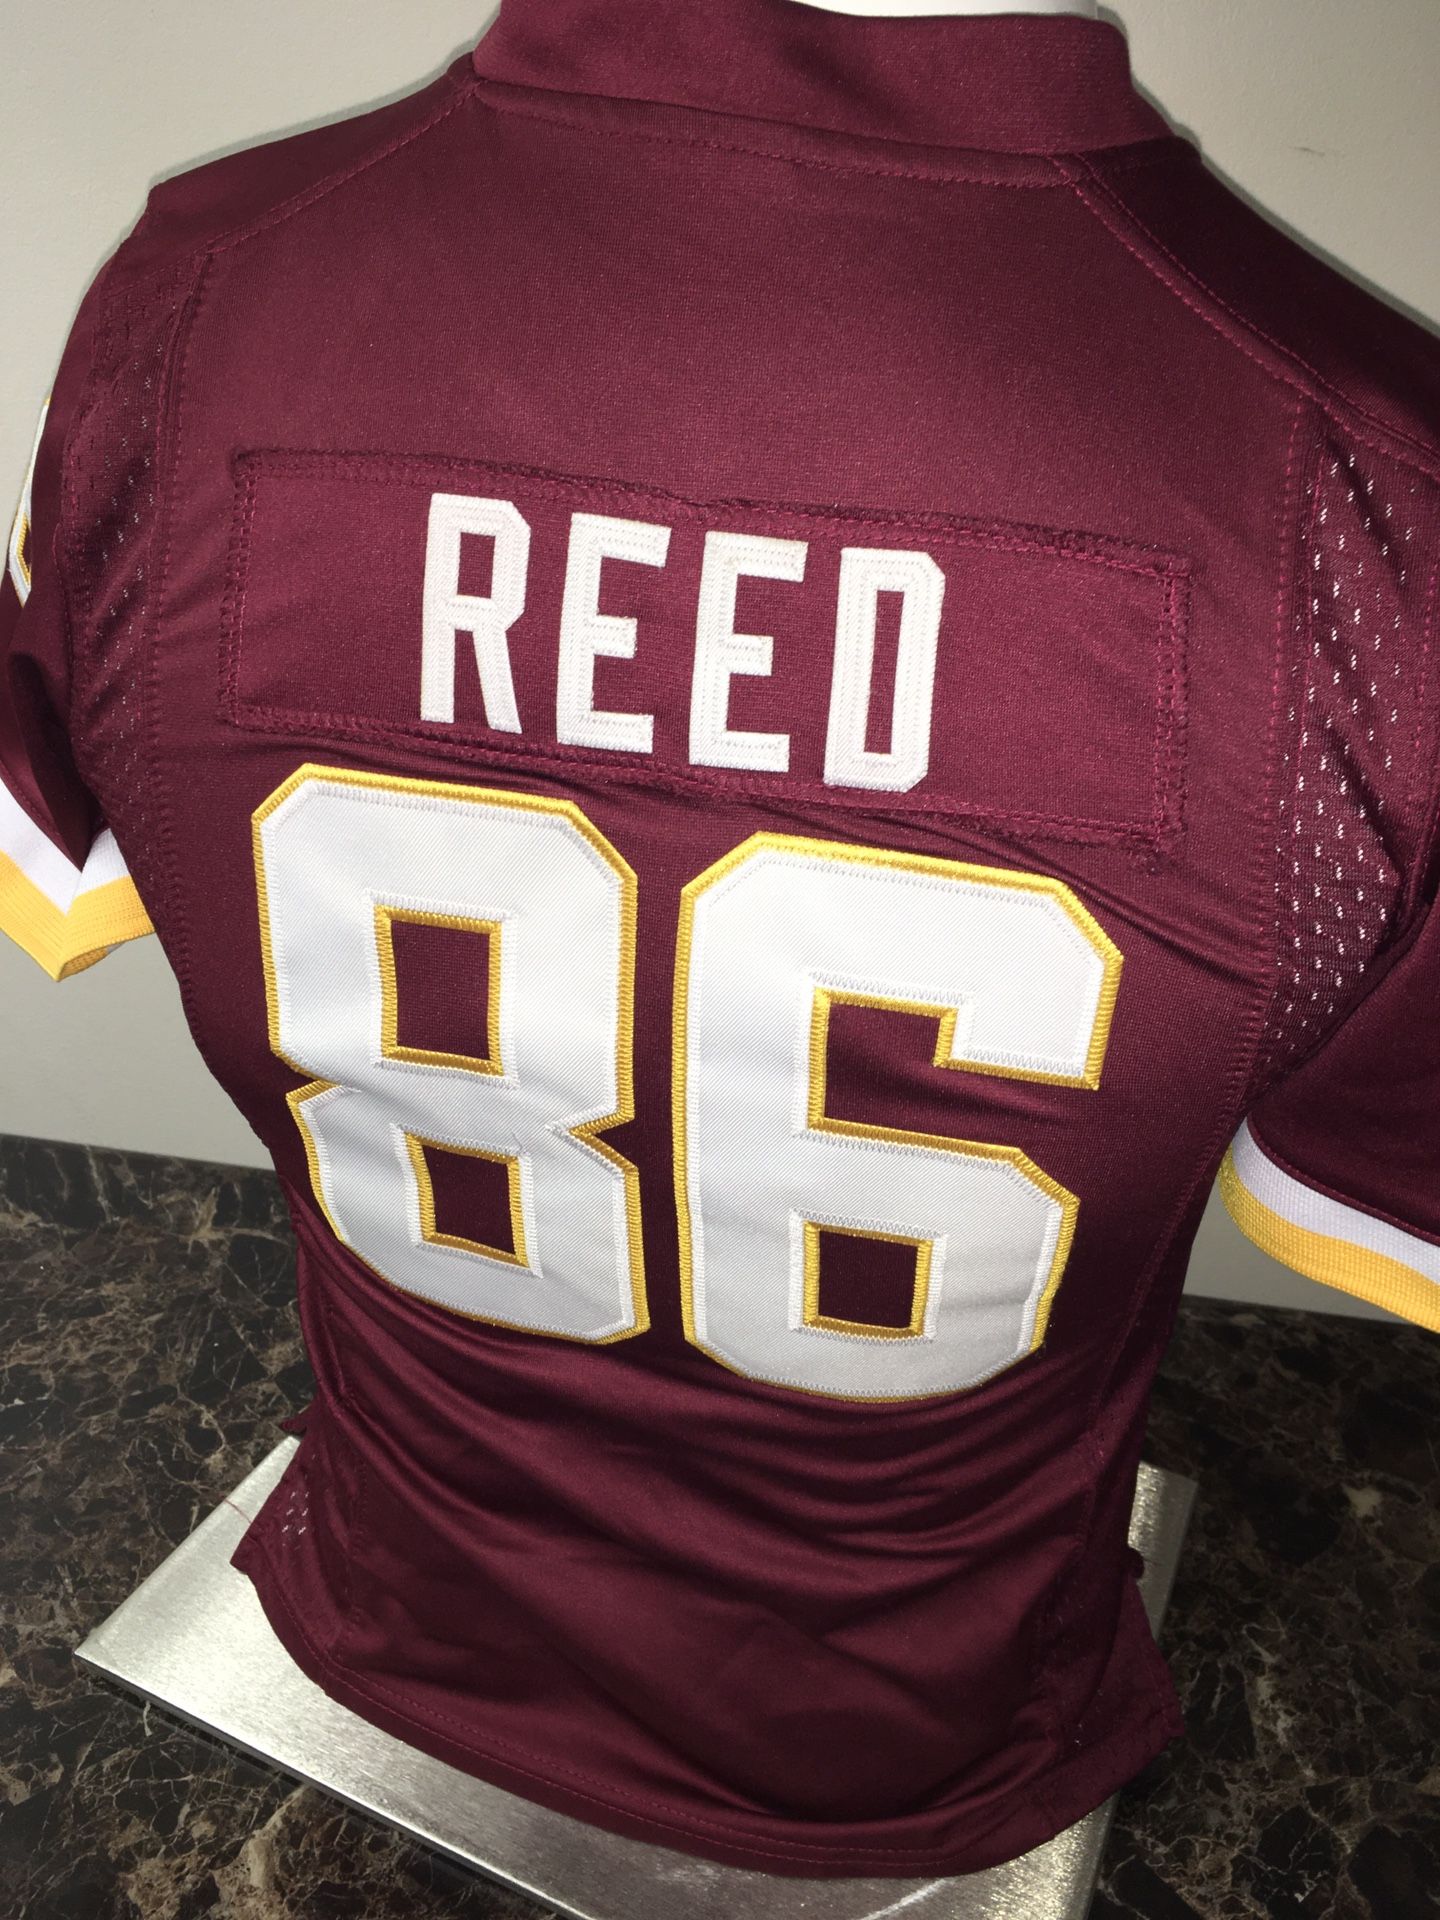 Nike NFL Washington Redskins 86 Jordan Reed On Field Jersey Youth Boy Small(8). Condition is "pre-owned". No rips, tears, stains. Please see photos